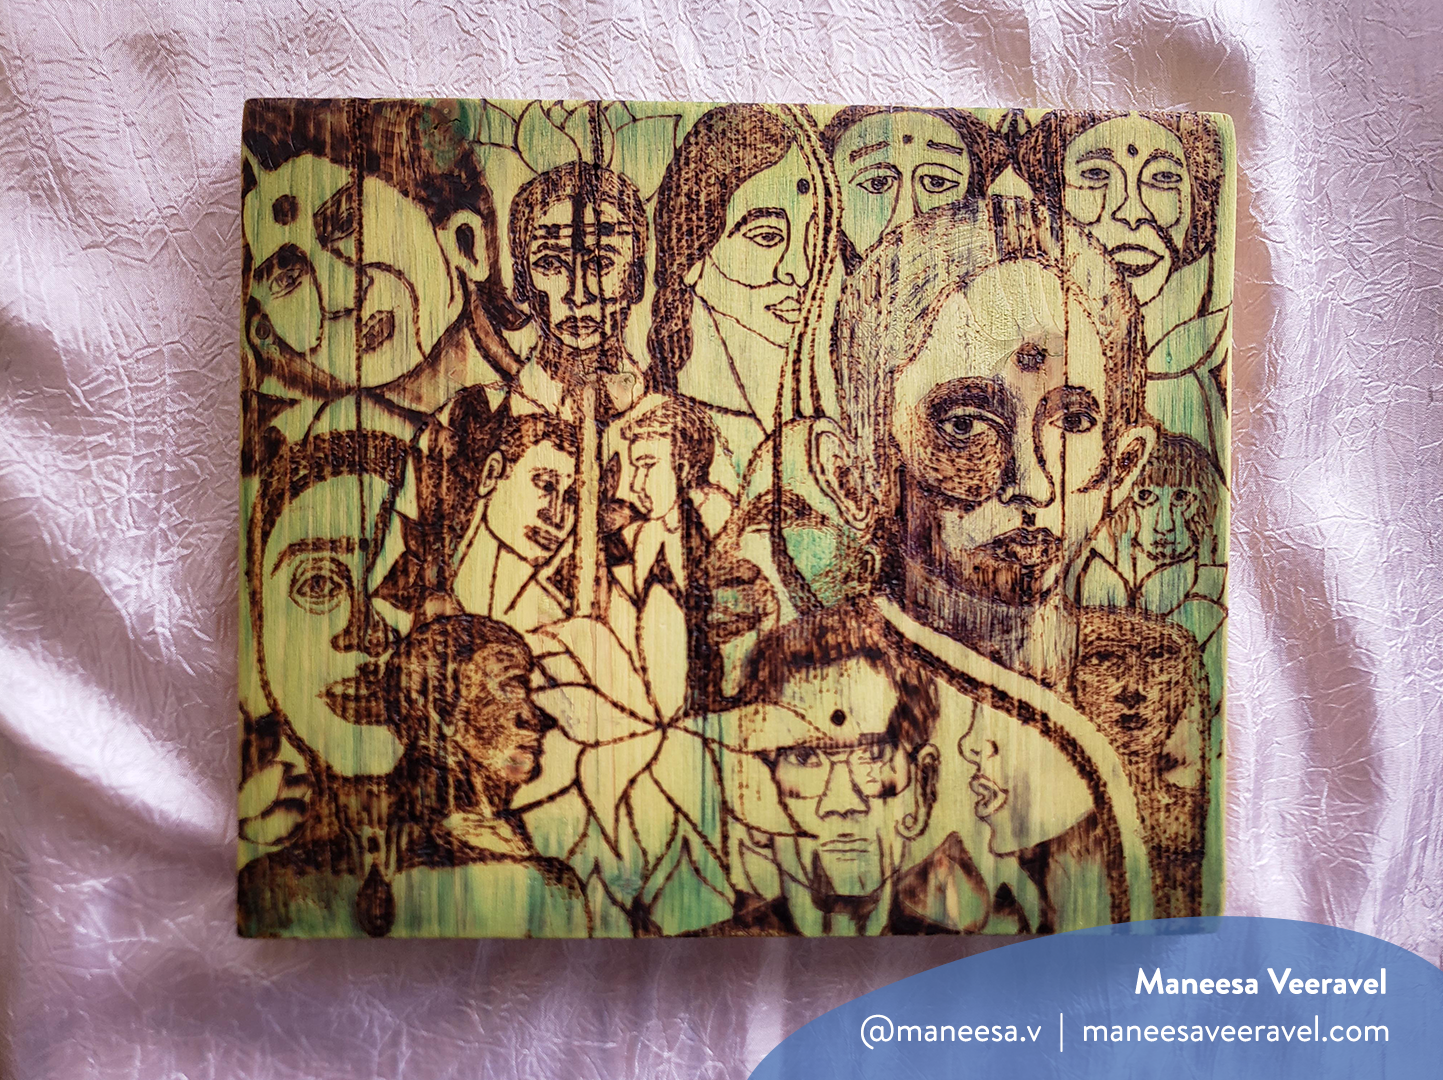 Horizontal photo of wood-burned artwork on a pink fabric background by Maneesa Veeravel. It features drawings of different faces on a yellow and green wood canvas. The image has a watermark with Maneesa’s name, Instagram handle (@maneesa.v) and website (maneesaveeravel.com)